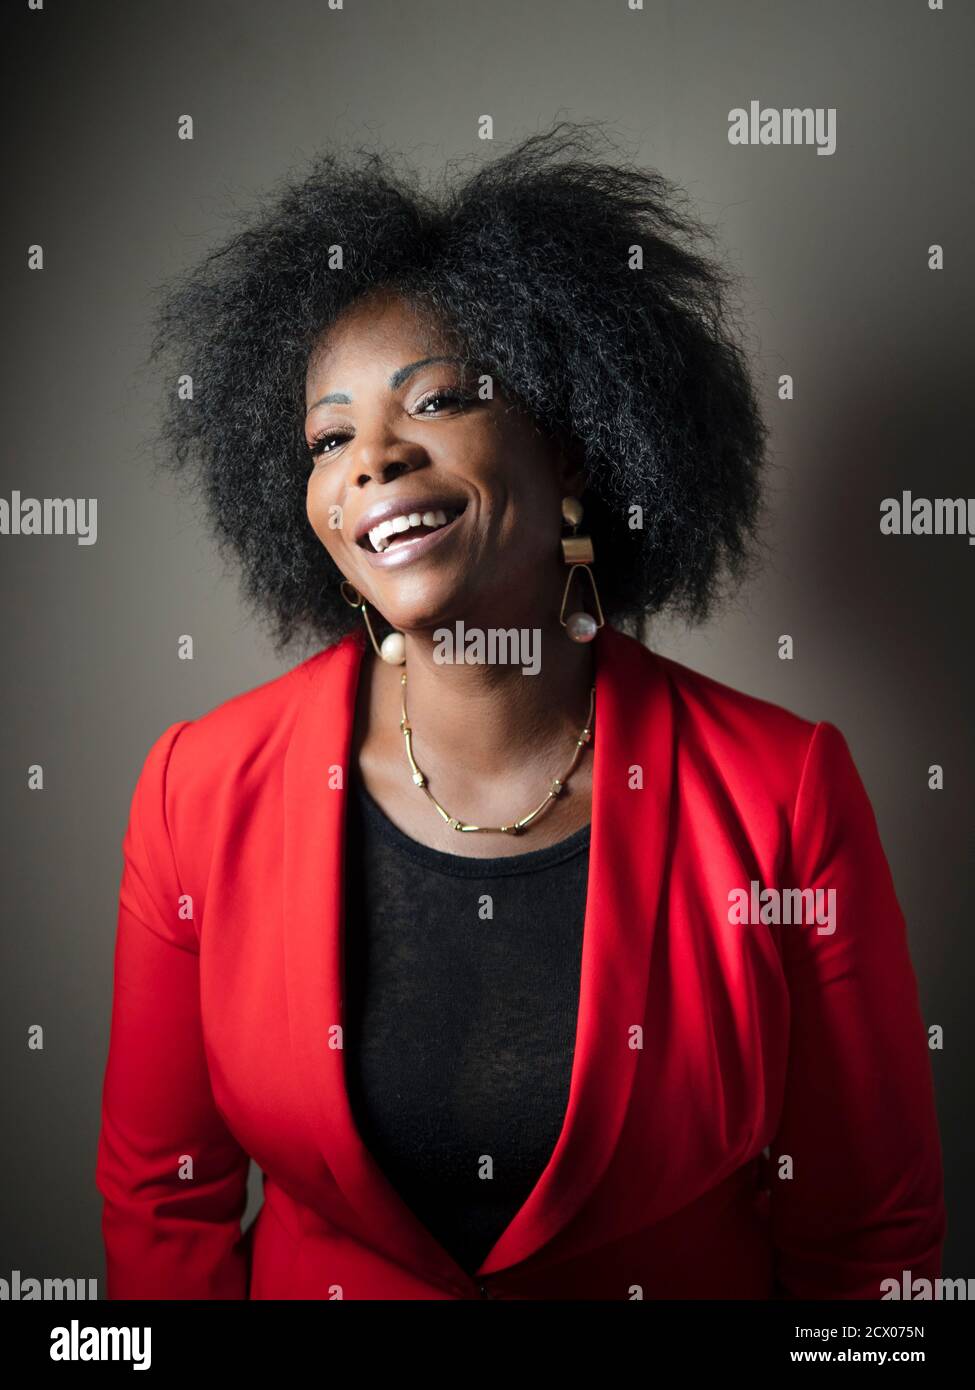 vertical portrait of an attractive African American woman laughing Stock Photo